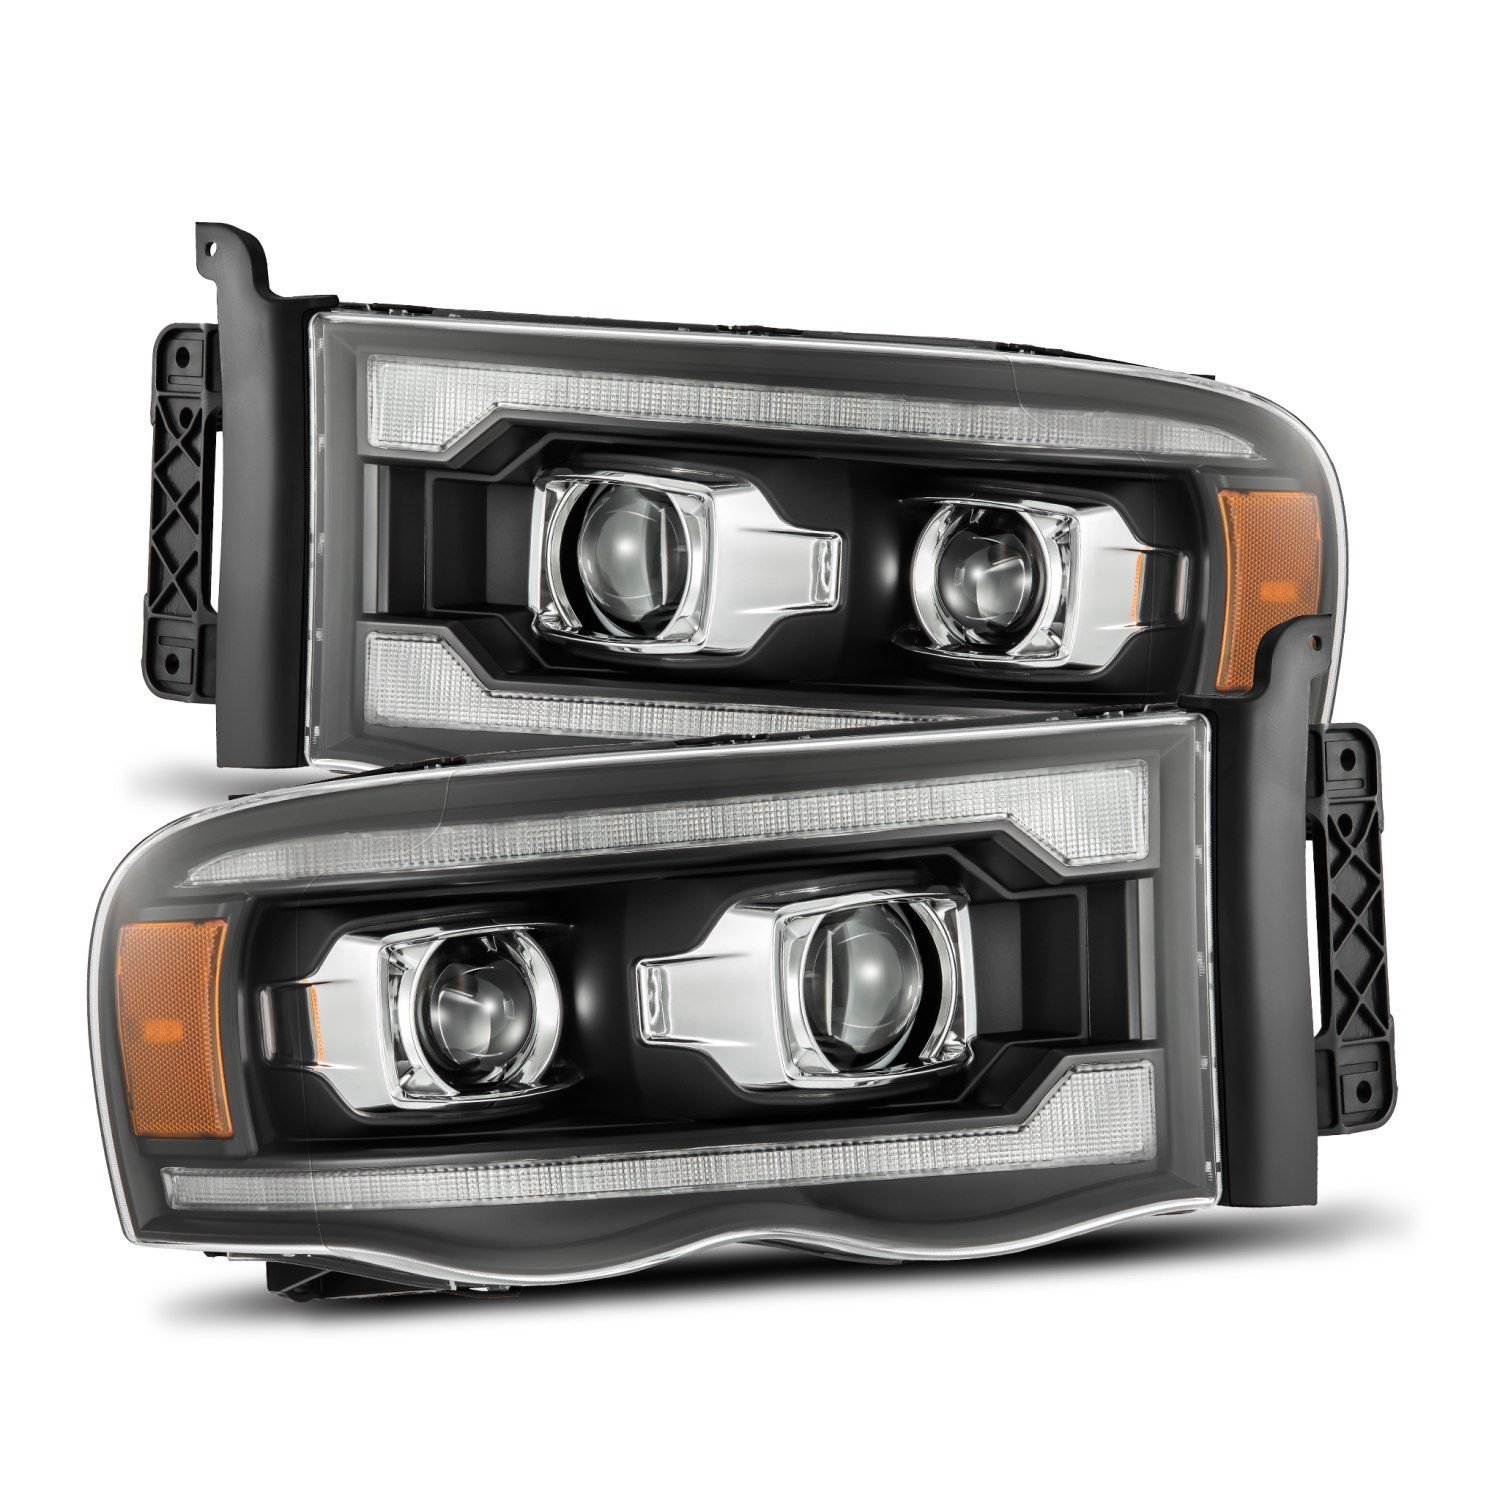 880567 Luxx-Series LED Projector Headlights for 2002-2005 Dodge RAM 1500/2500/3500 - Black